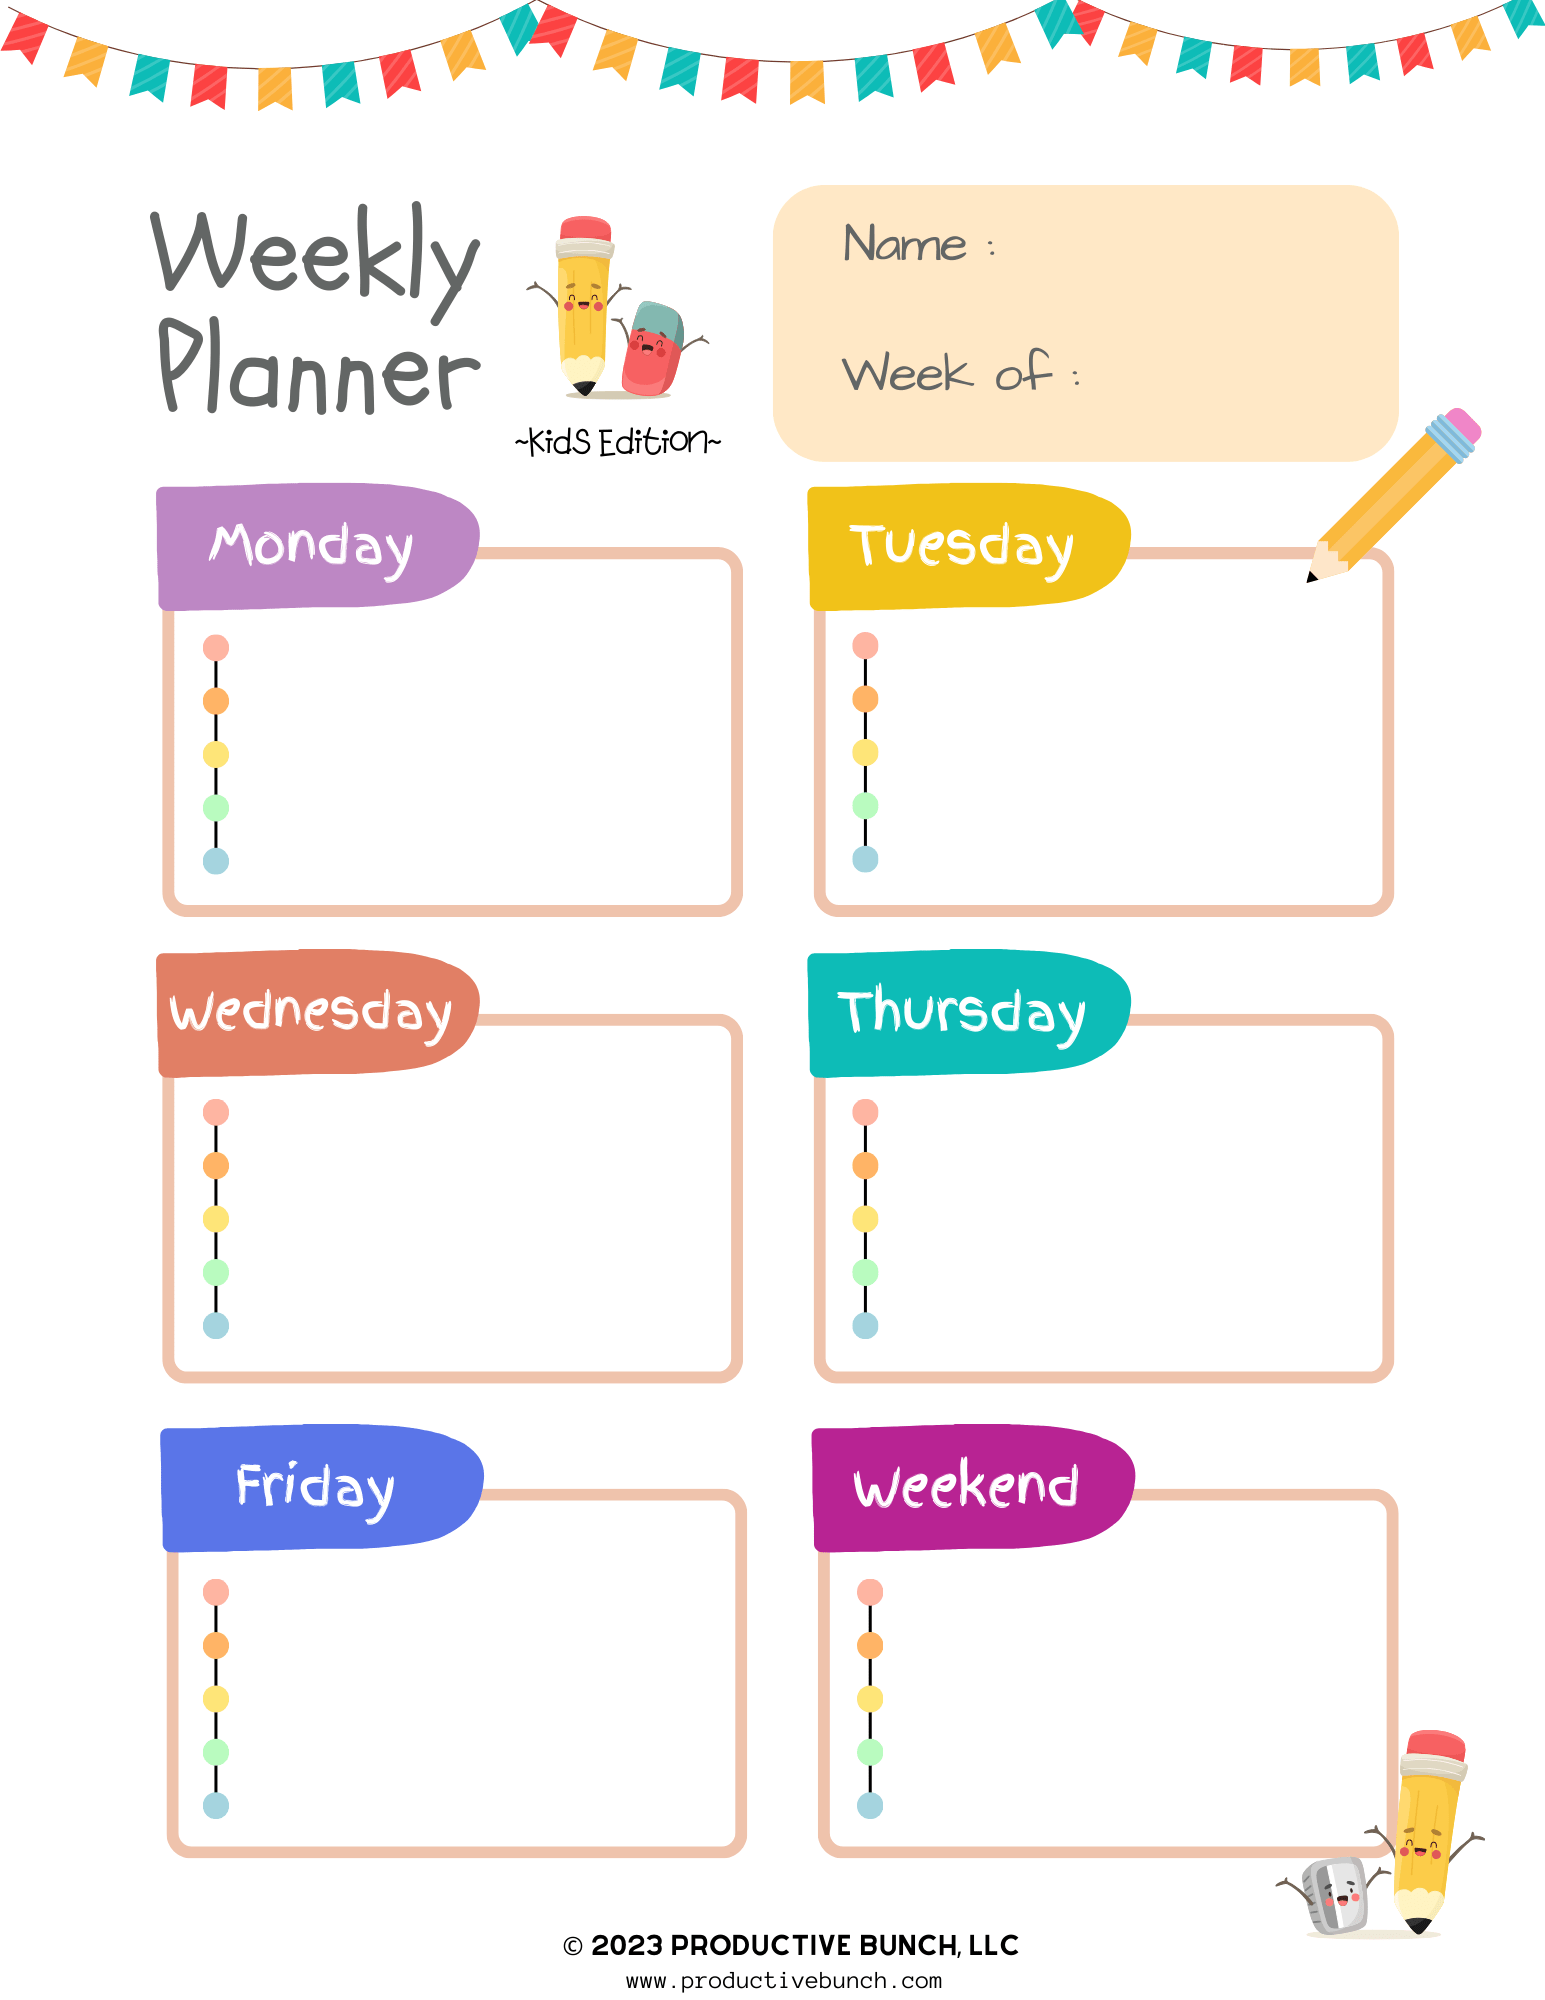 Foster organization and creativity with the colorful Kids Weekly Planner Pad.